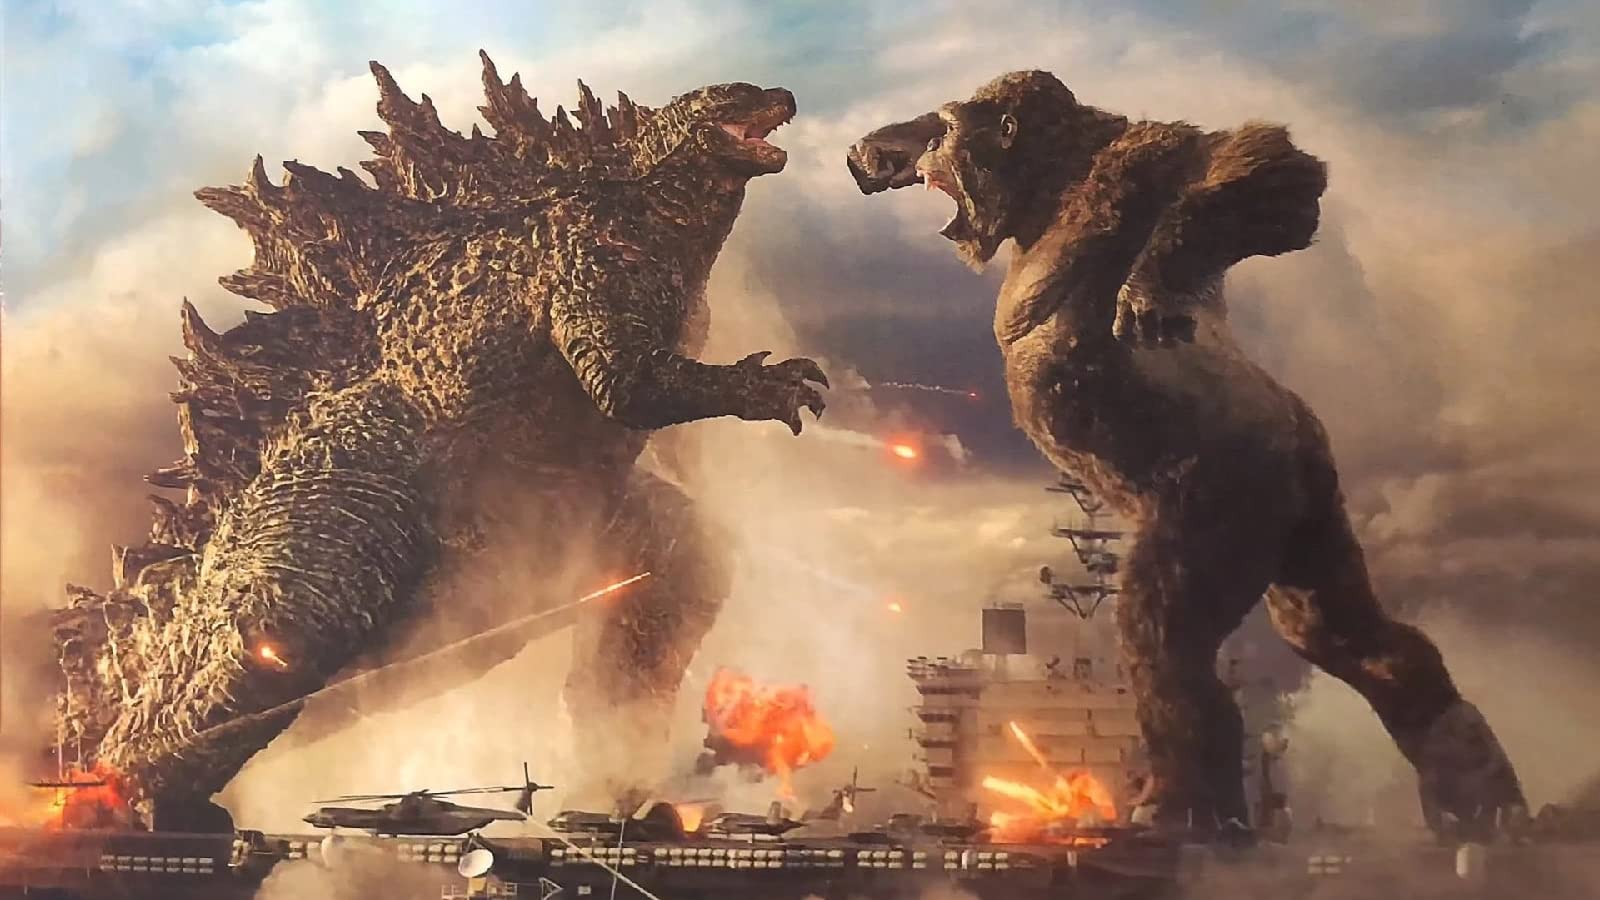 A screenshot from Godzilla vs Kong showing the two titans fighting on an aircraft carrier.